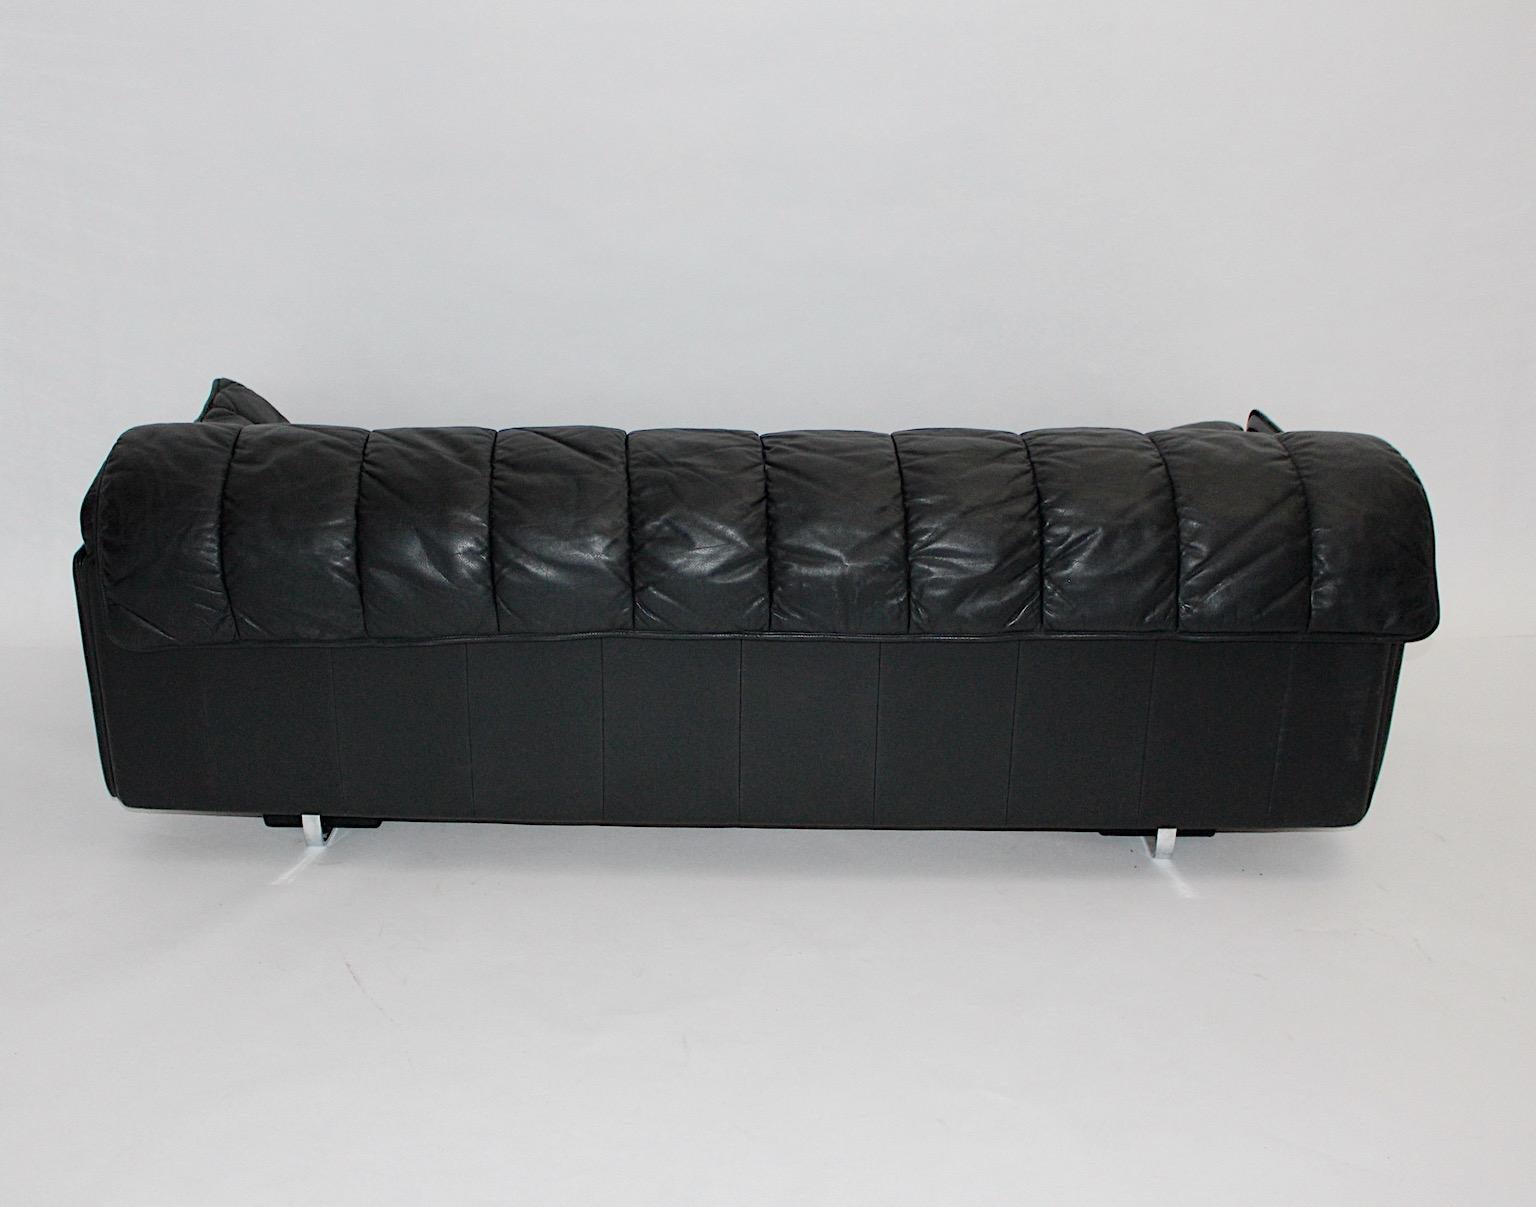 Late 20th Century DeSede Black Leather Vintage Freestanding DS 69 Sofa Daybed 1970s Switzerland For Sale